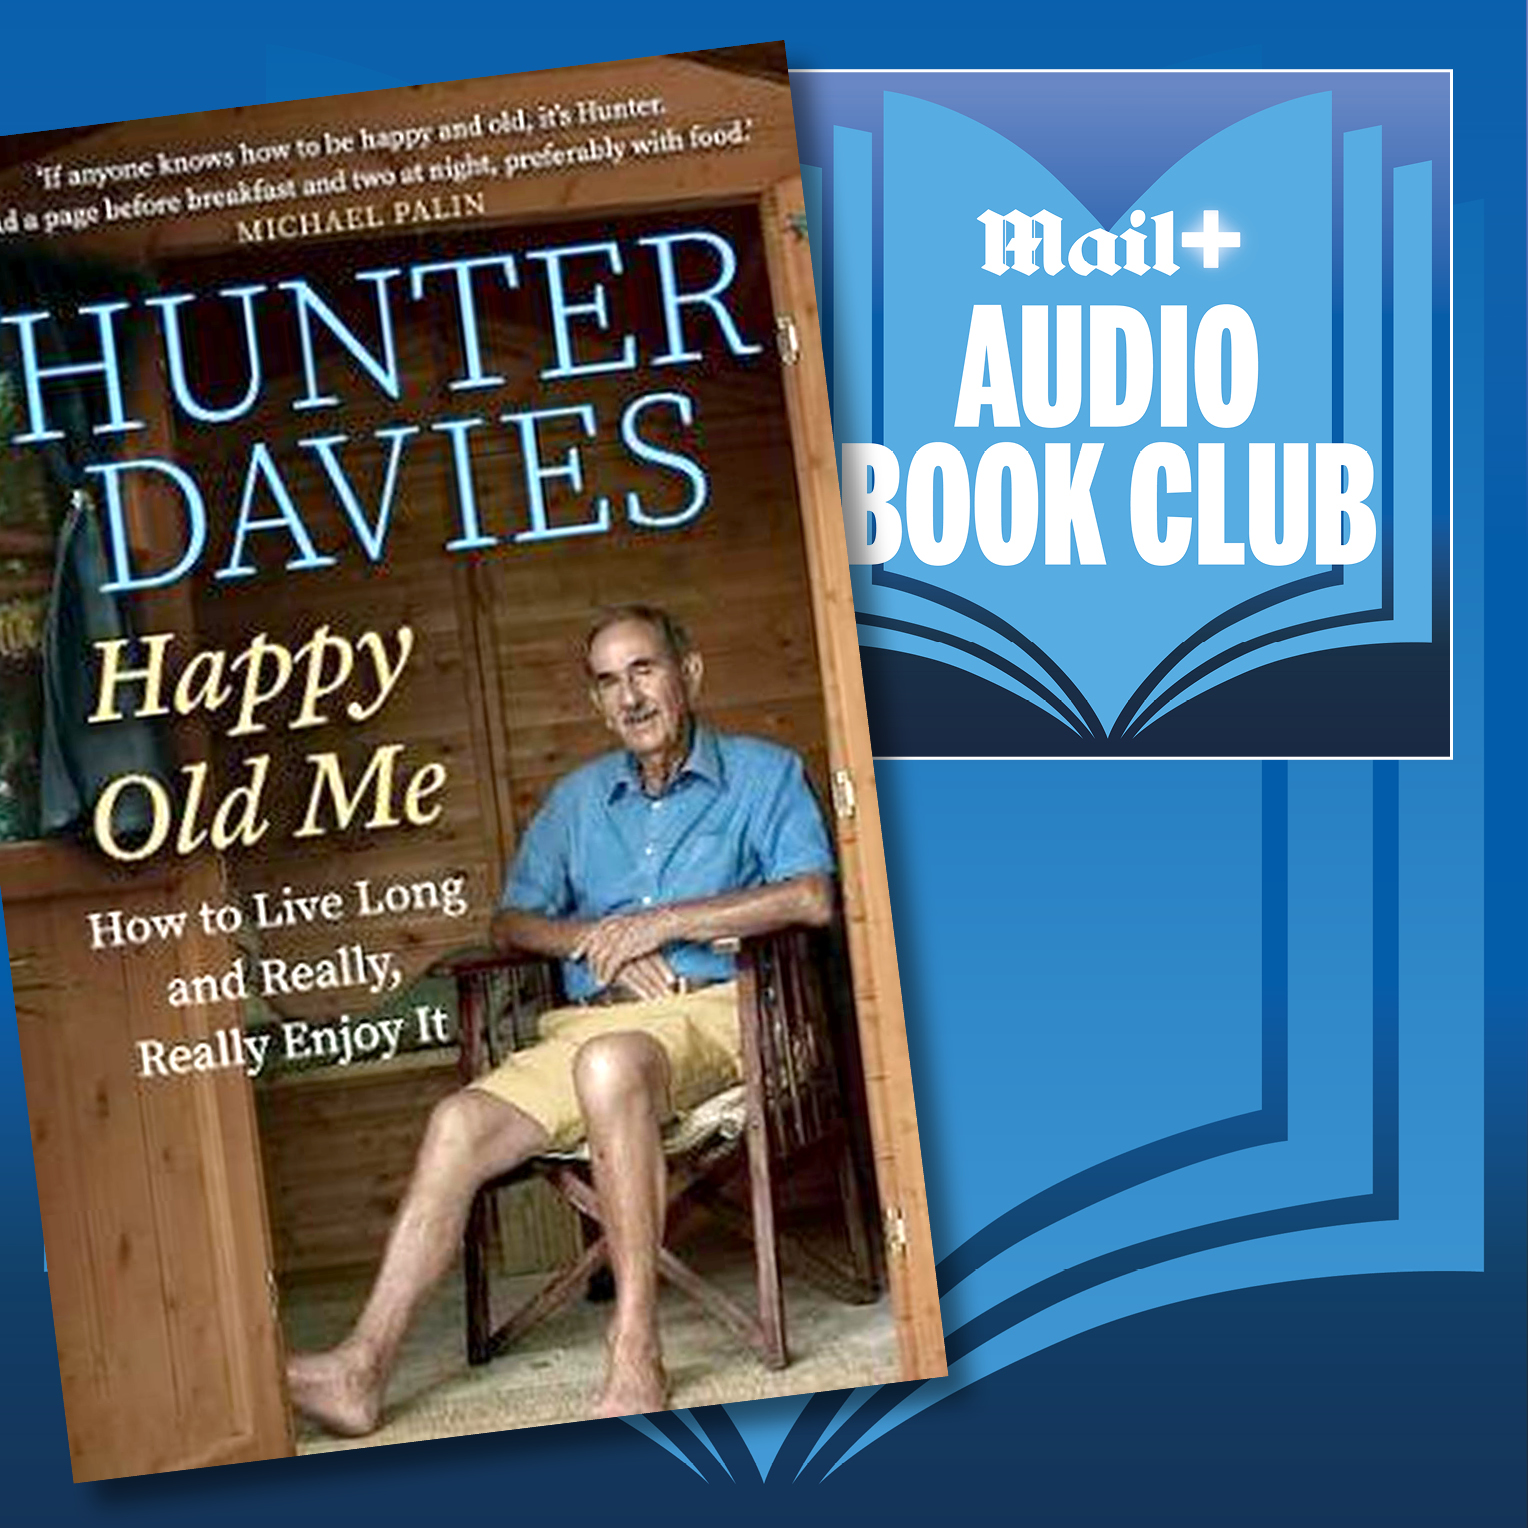 Happy Old Me by Hunter Davies from Mail+ Audio Book Club